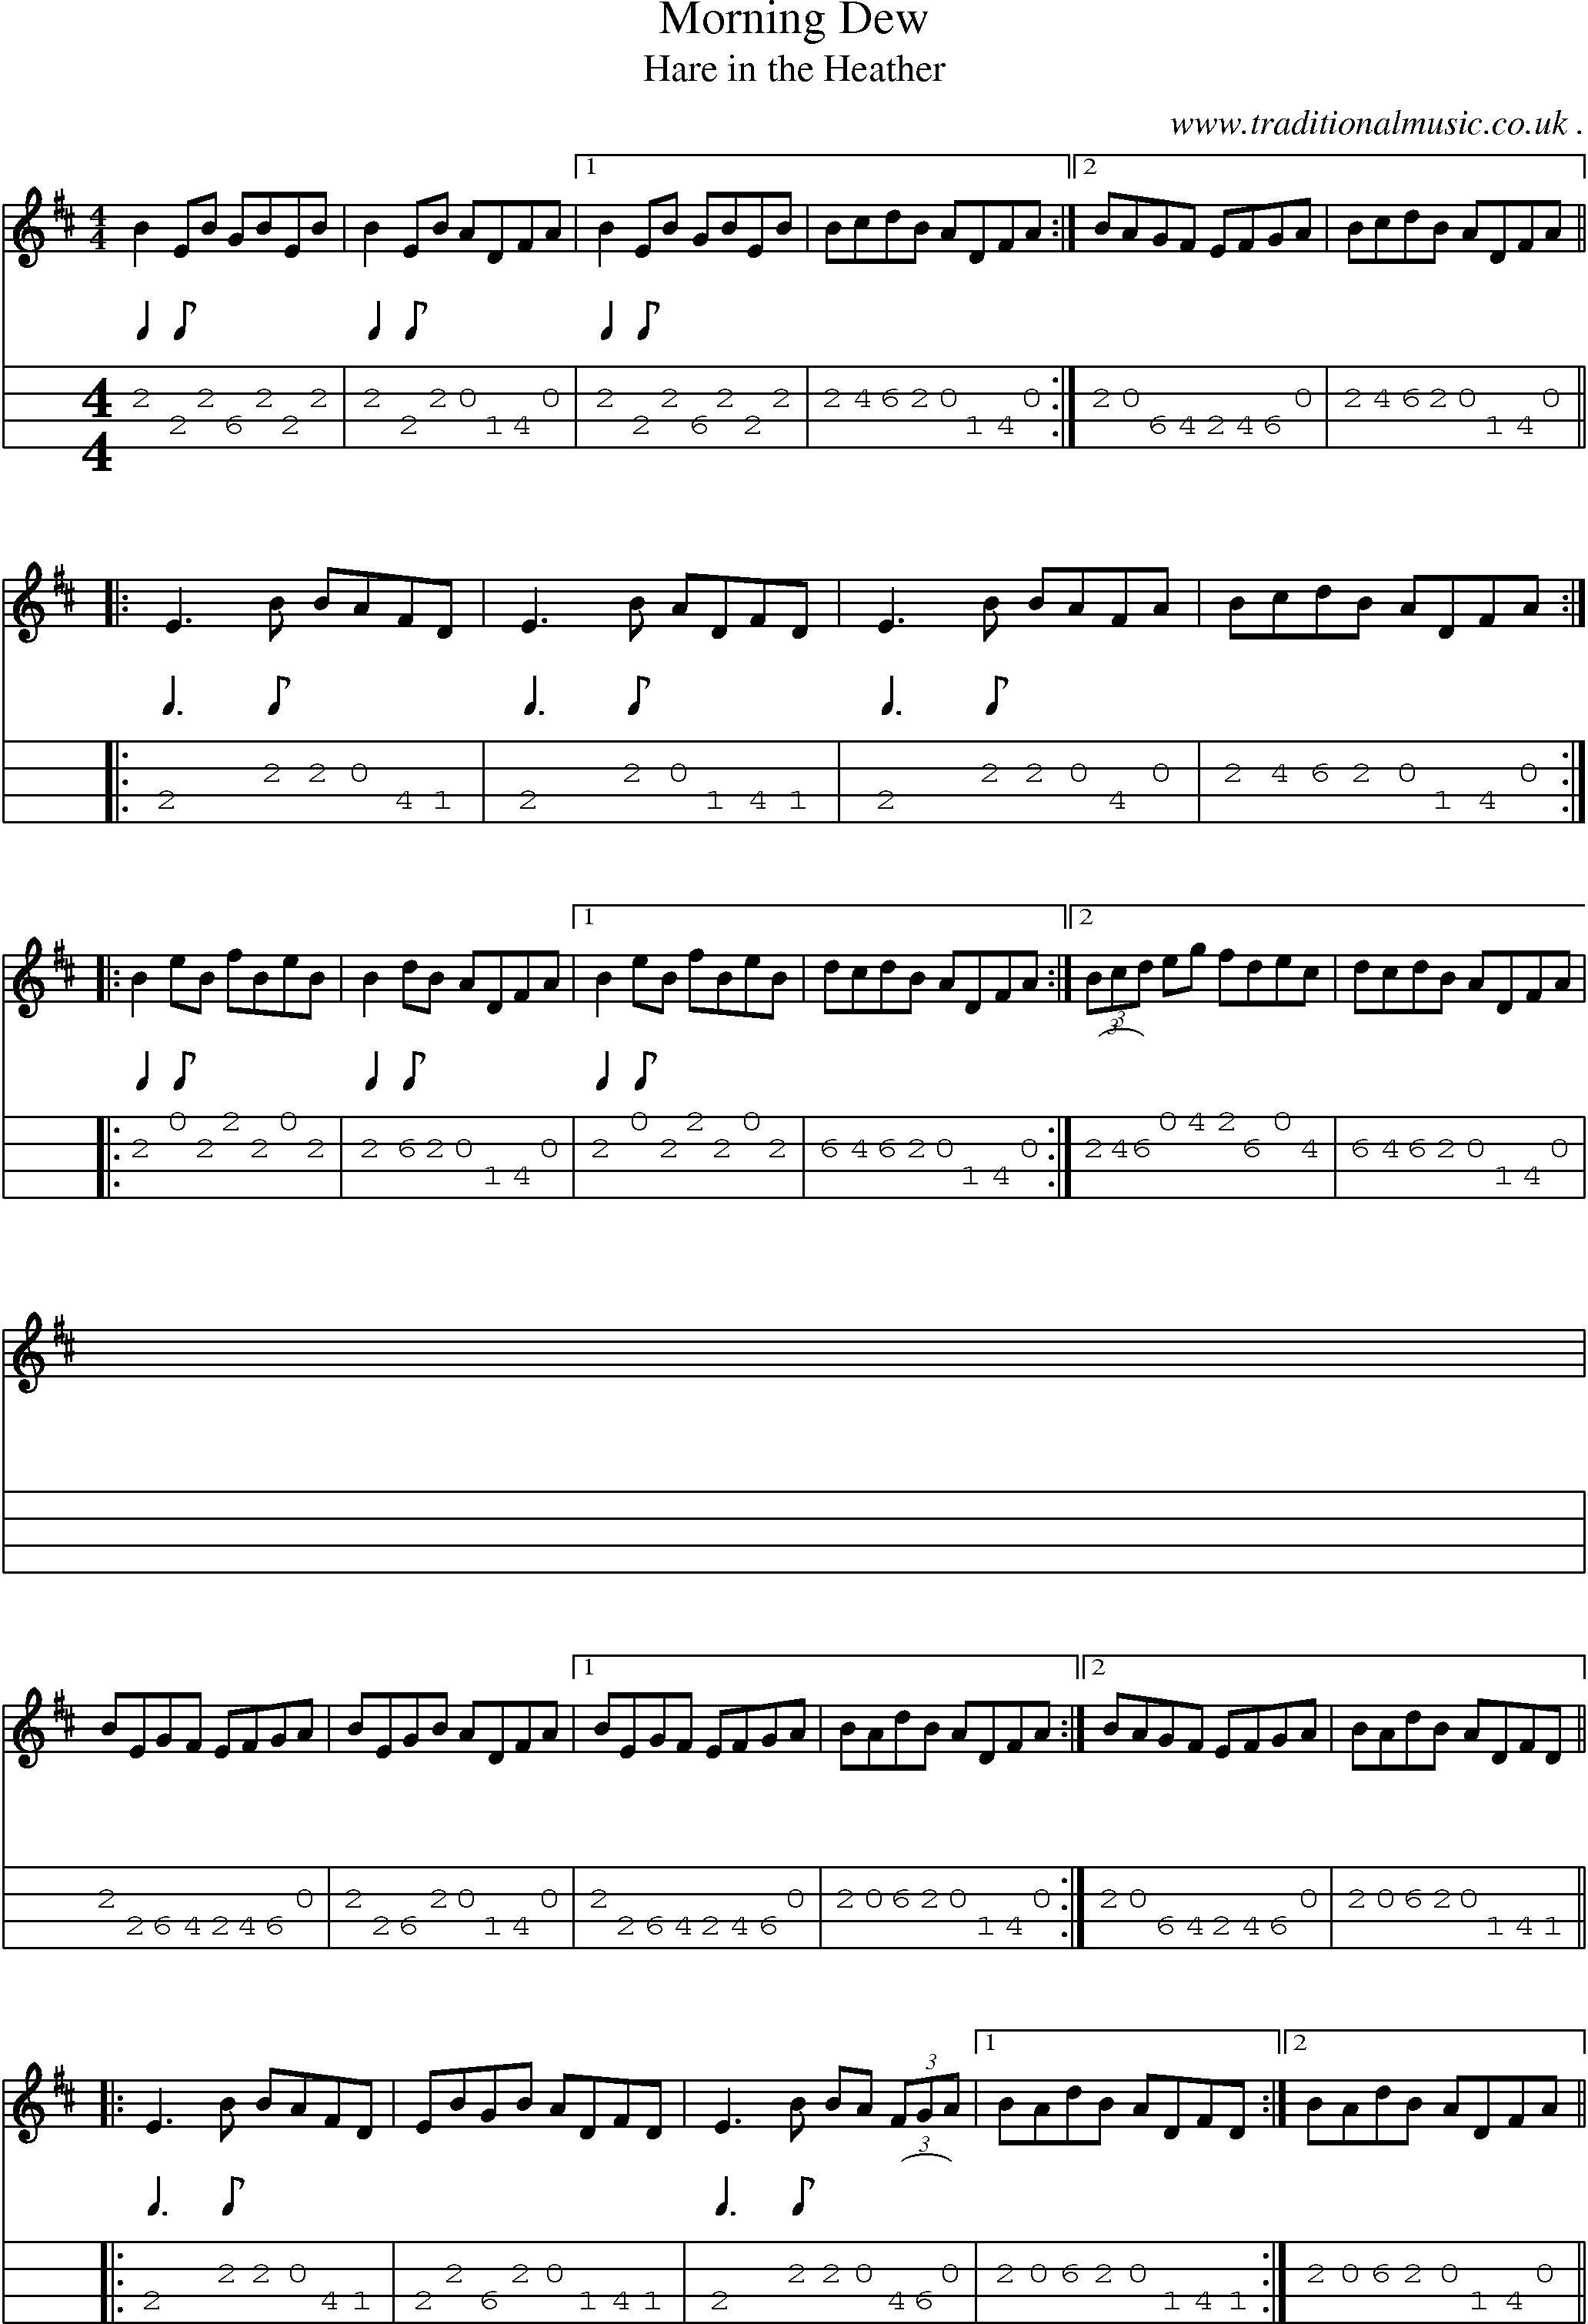 Sheet-Music and Mandolin Tabs for Morning Dew